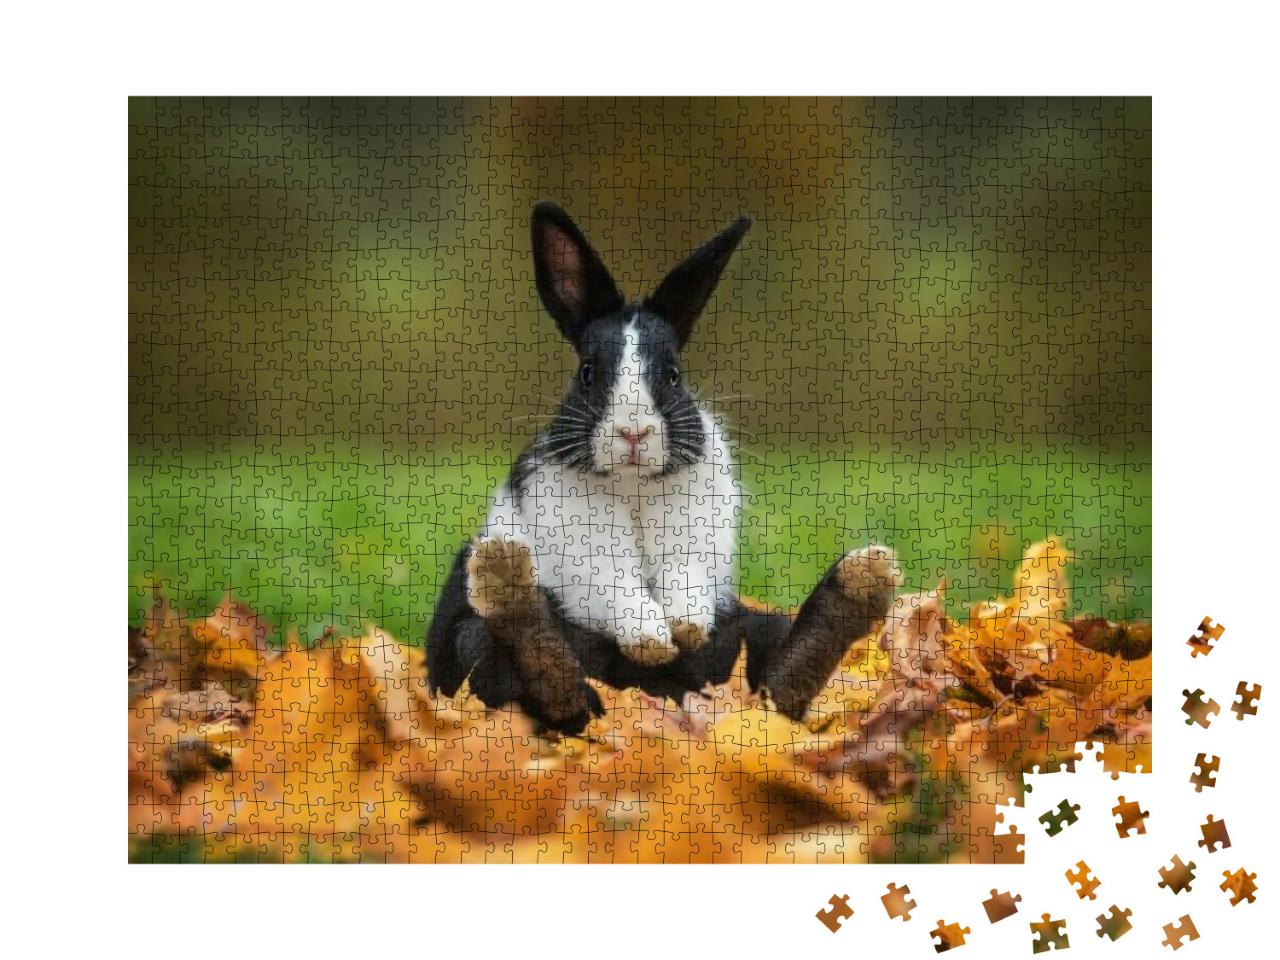 Little Funny Rabbit Sitting in Leaves in Autumn... Jigsaw Puzzle with 1000 pieces